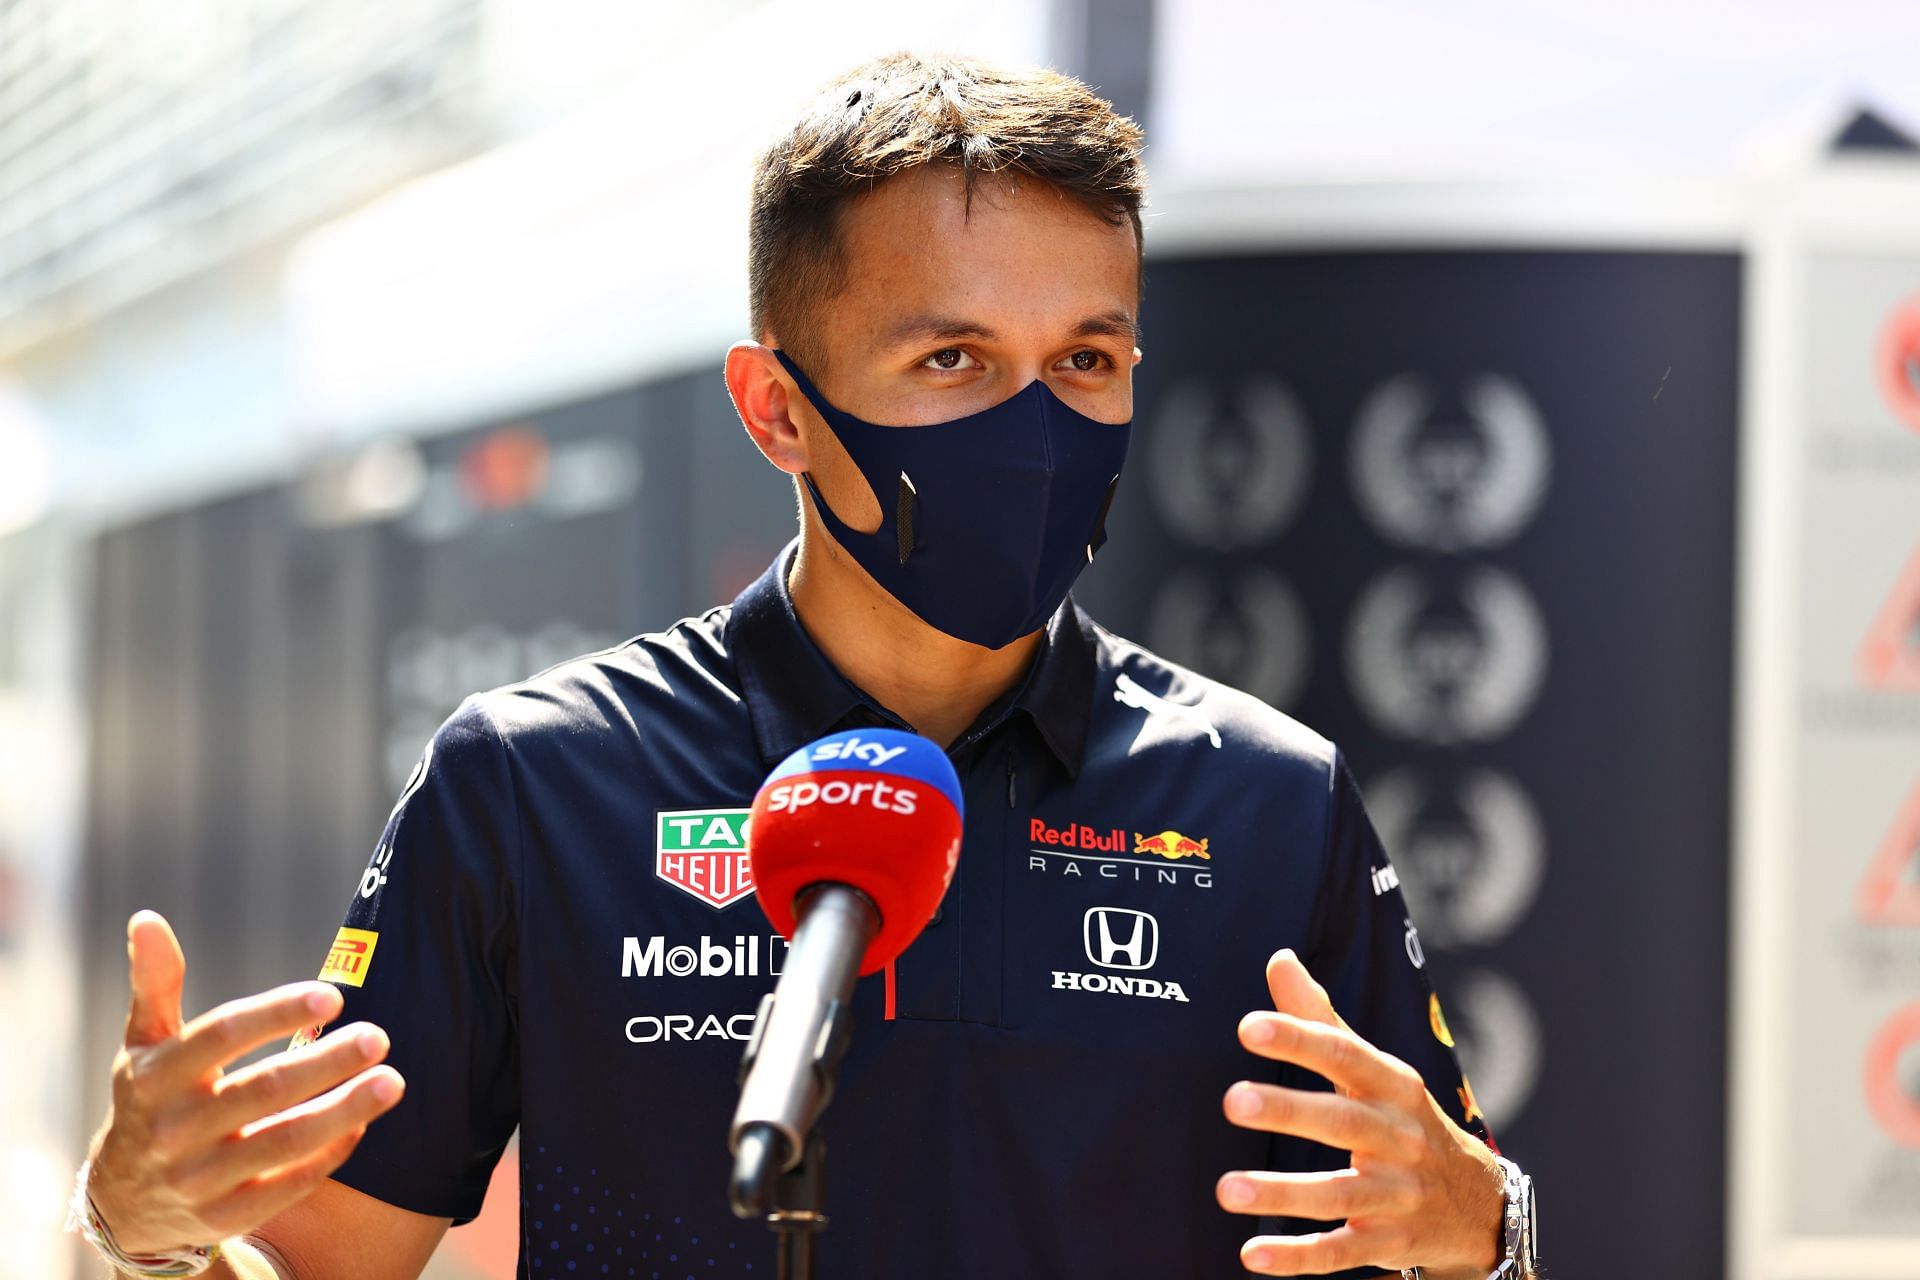 F1 Grand Prix of Italy - Alex Albon attends a pre-race interview (Photo by Bryn Lennon/Getty Images)